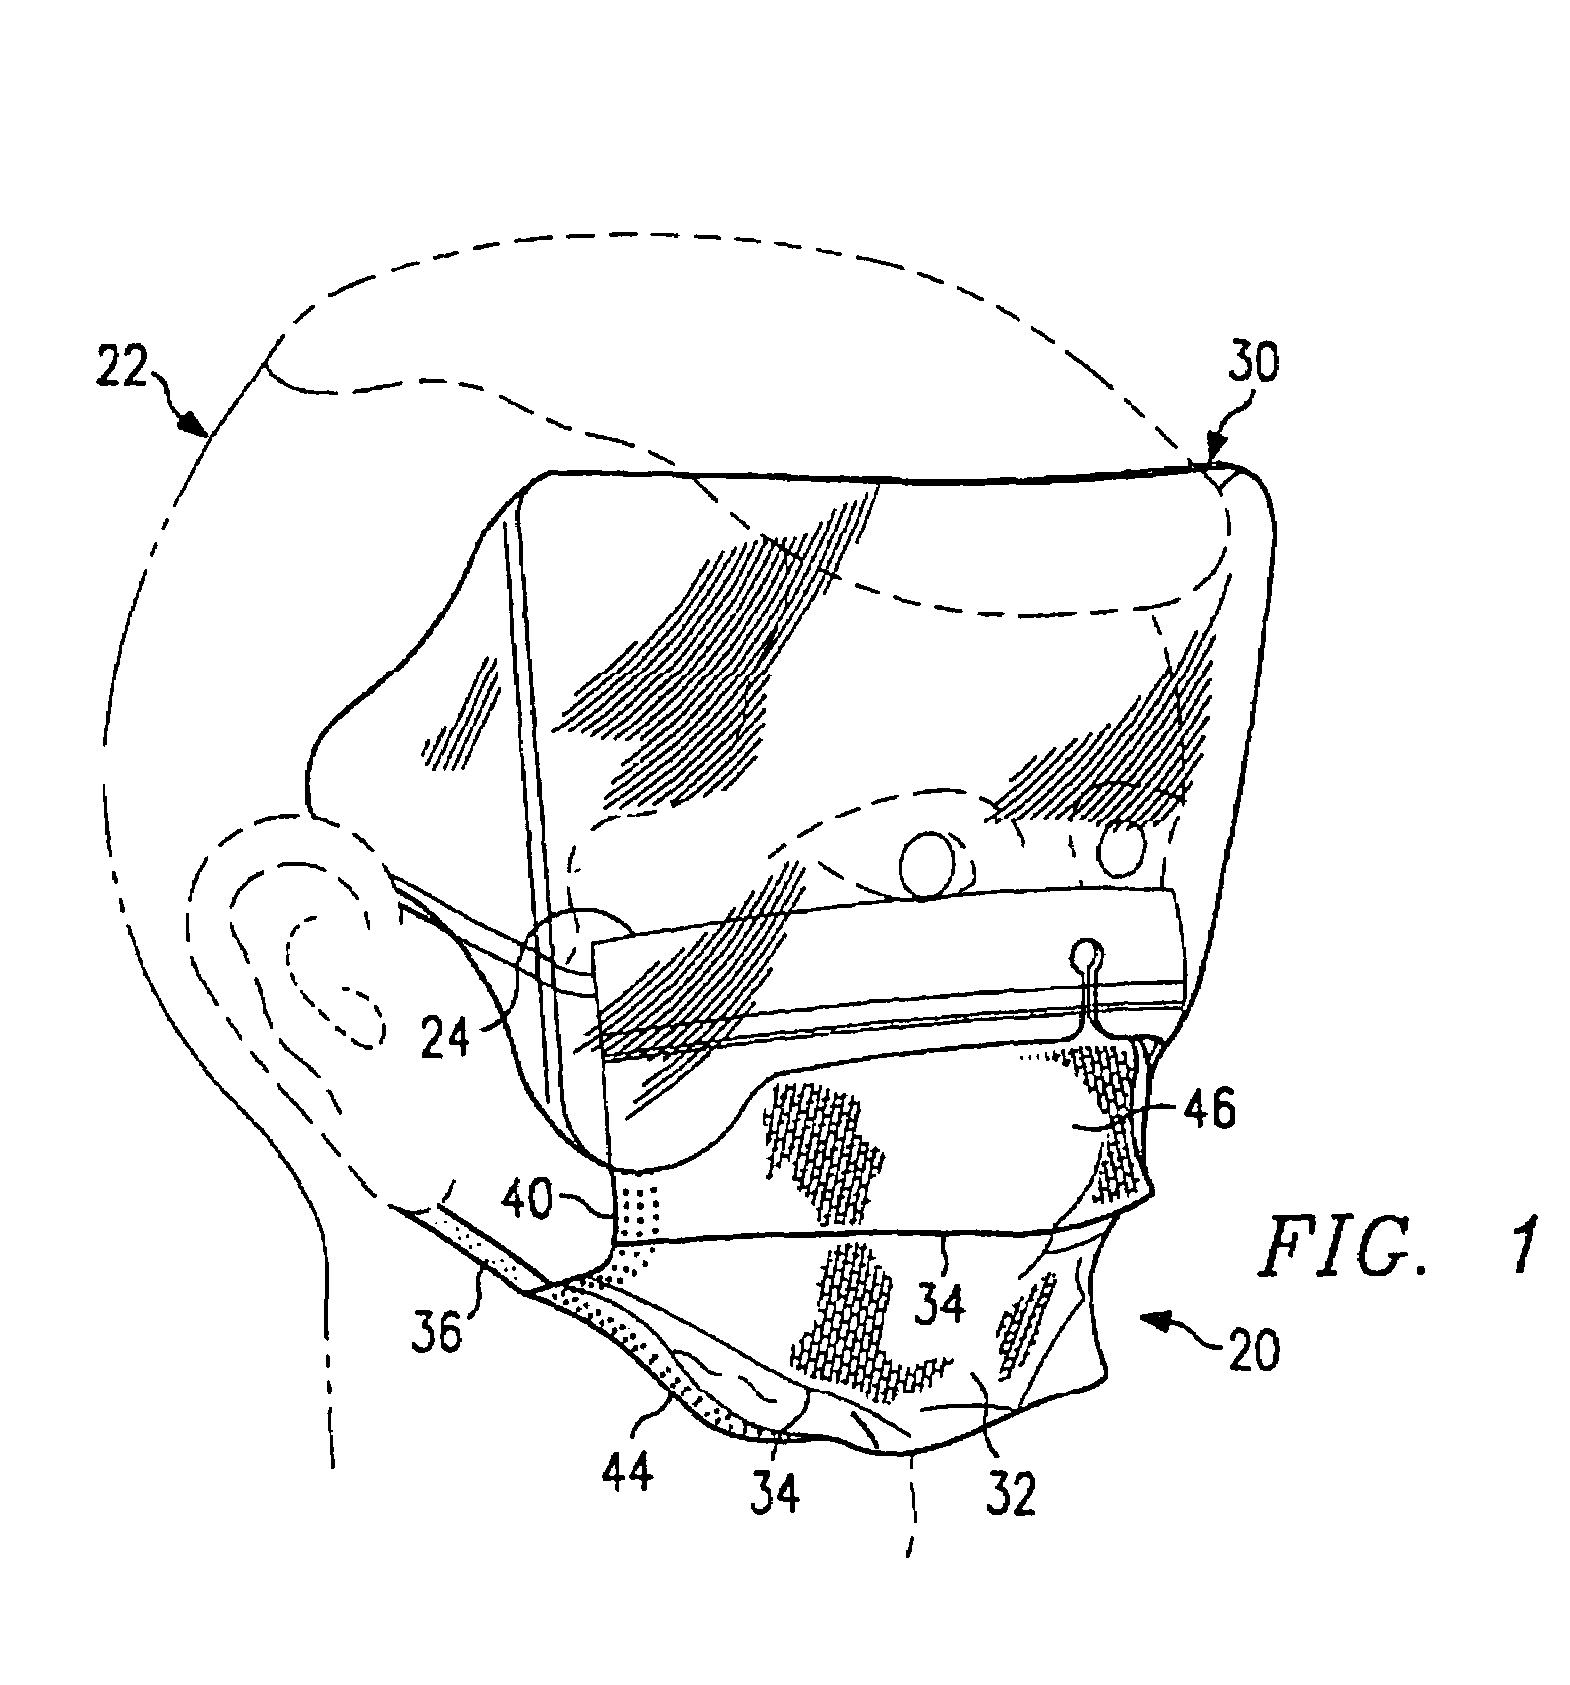 Facemasks containing an anti-fog / anti-glare composition